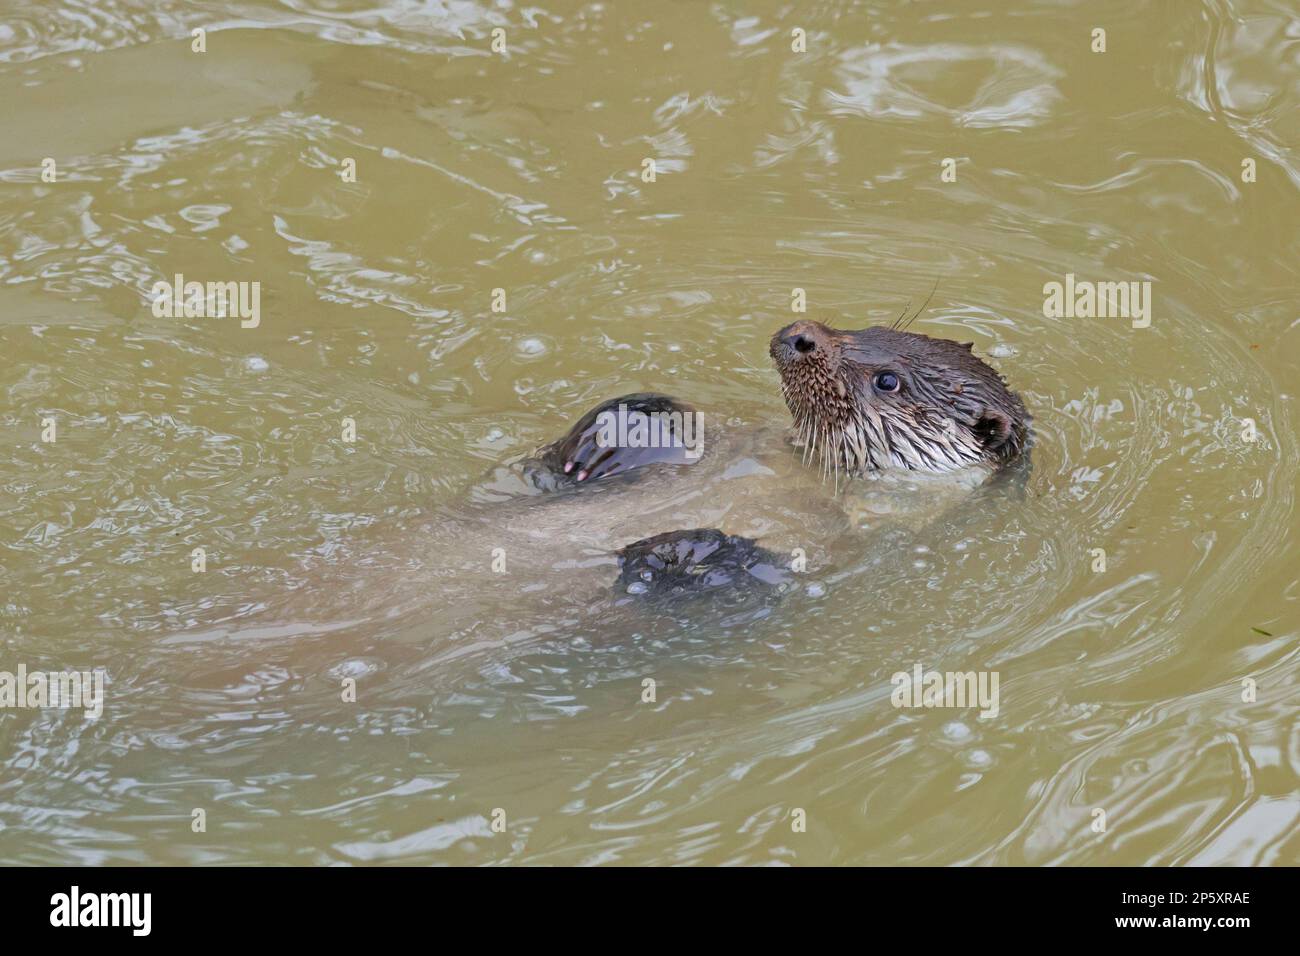 European river otter, European Otter, Eurasian Otter (Lutra lutra), swimming on its back in the water, side view, Germany Stock Photo